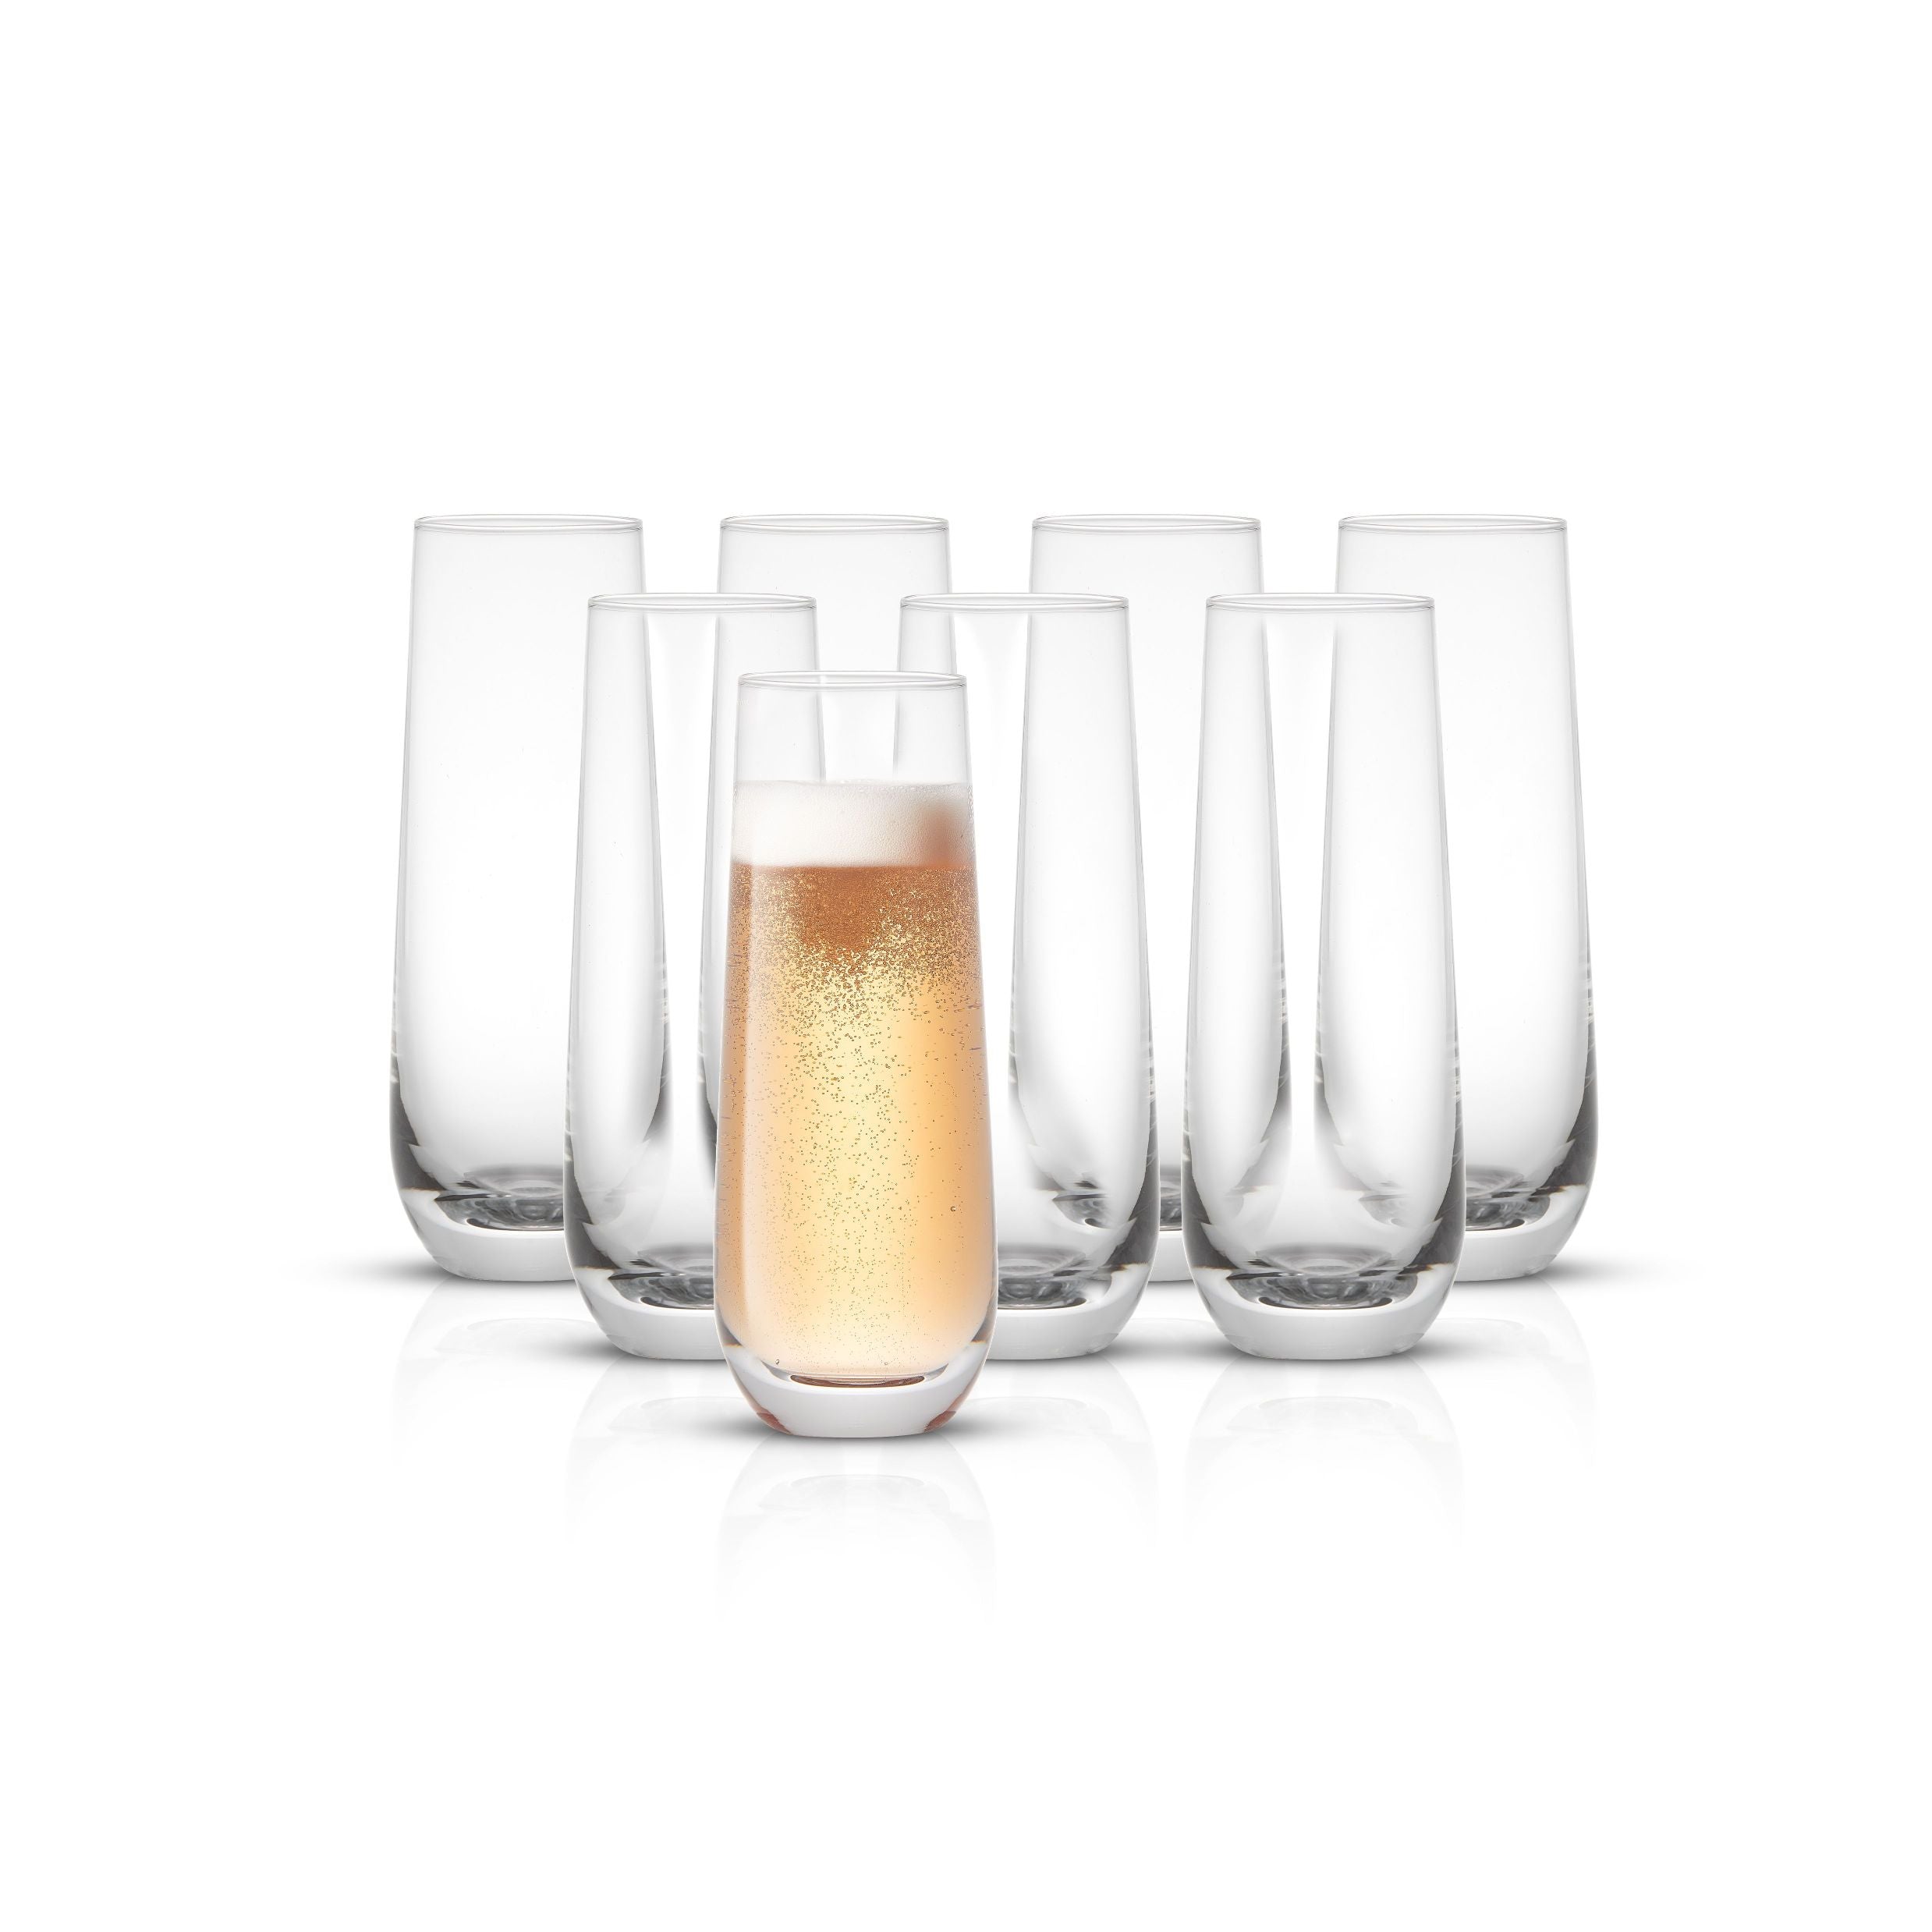 Fluted Iridescent Champagne Flutes – Christian Siriano Chroma  6oz Champagne Glasses Set Of 2. Unique Champagne Flute, Mimosa Glasses, Cocktail  Glasses or Wedding Champagne Flutes.: Mixed Drinkware Sets